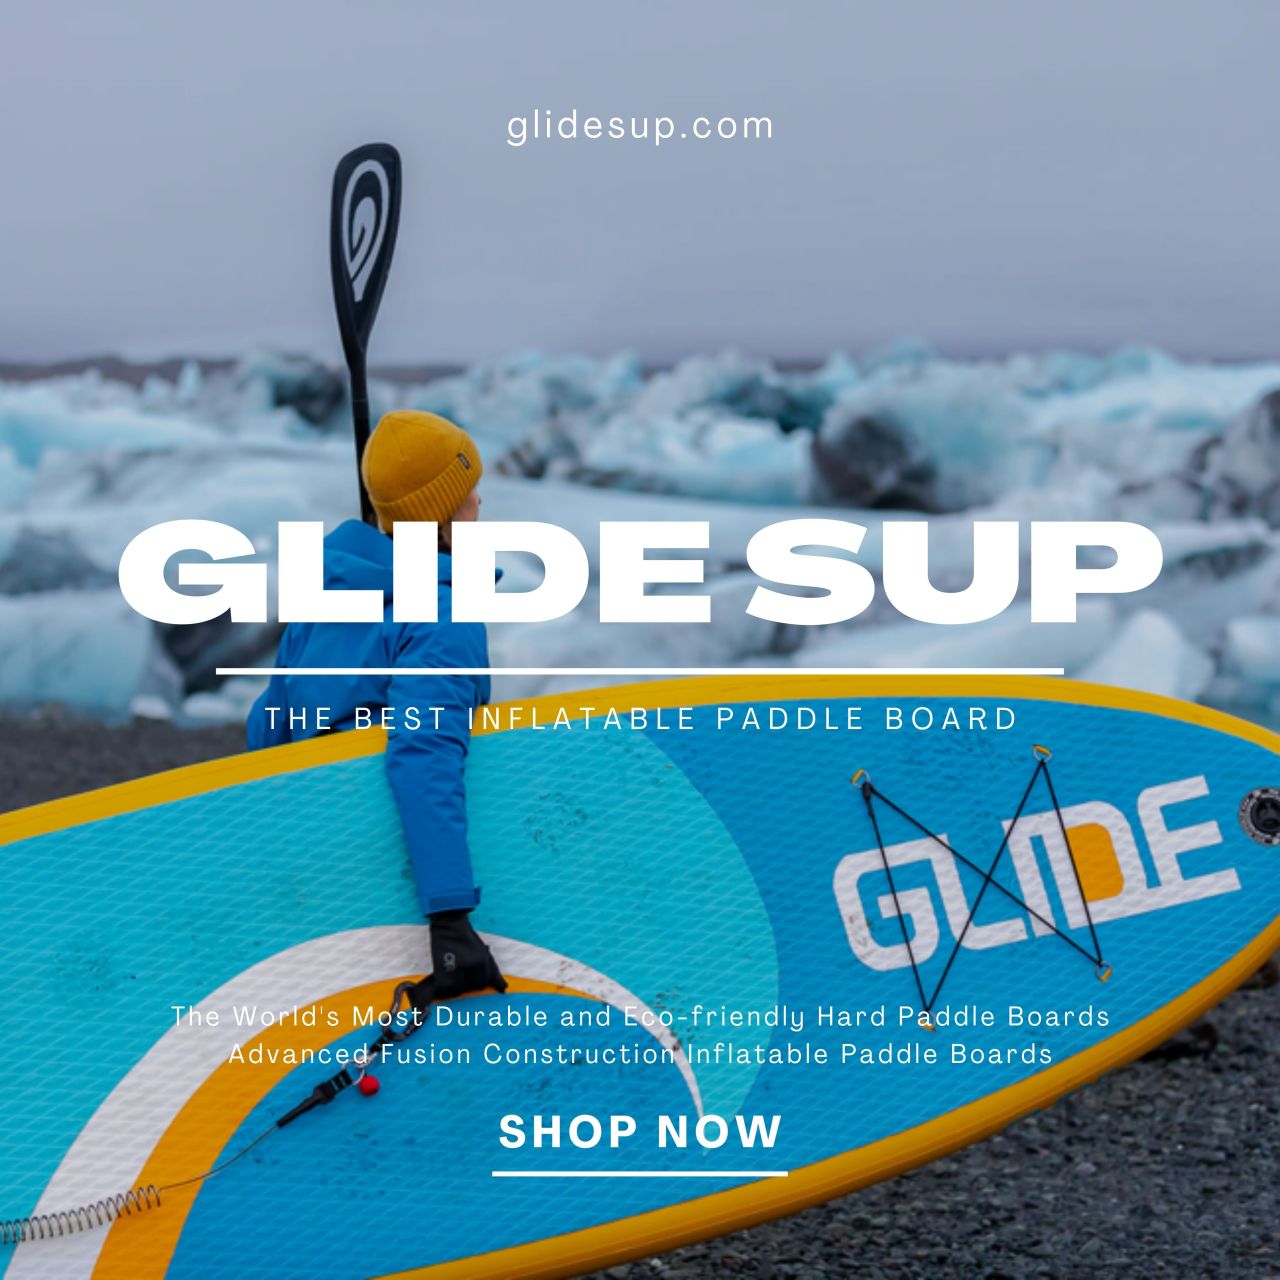 The Best Inflatable Paddle Boards On The Planet!